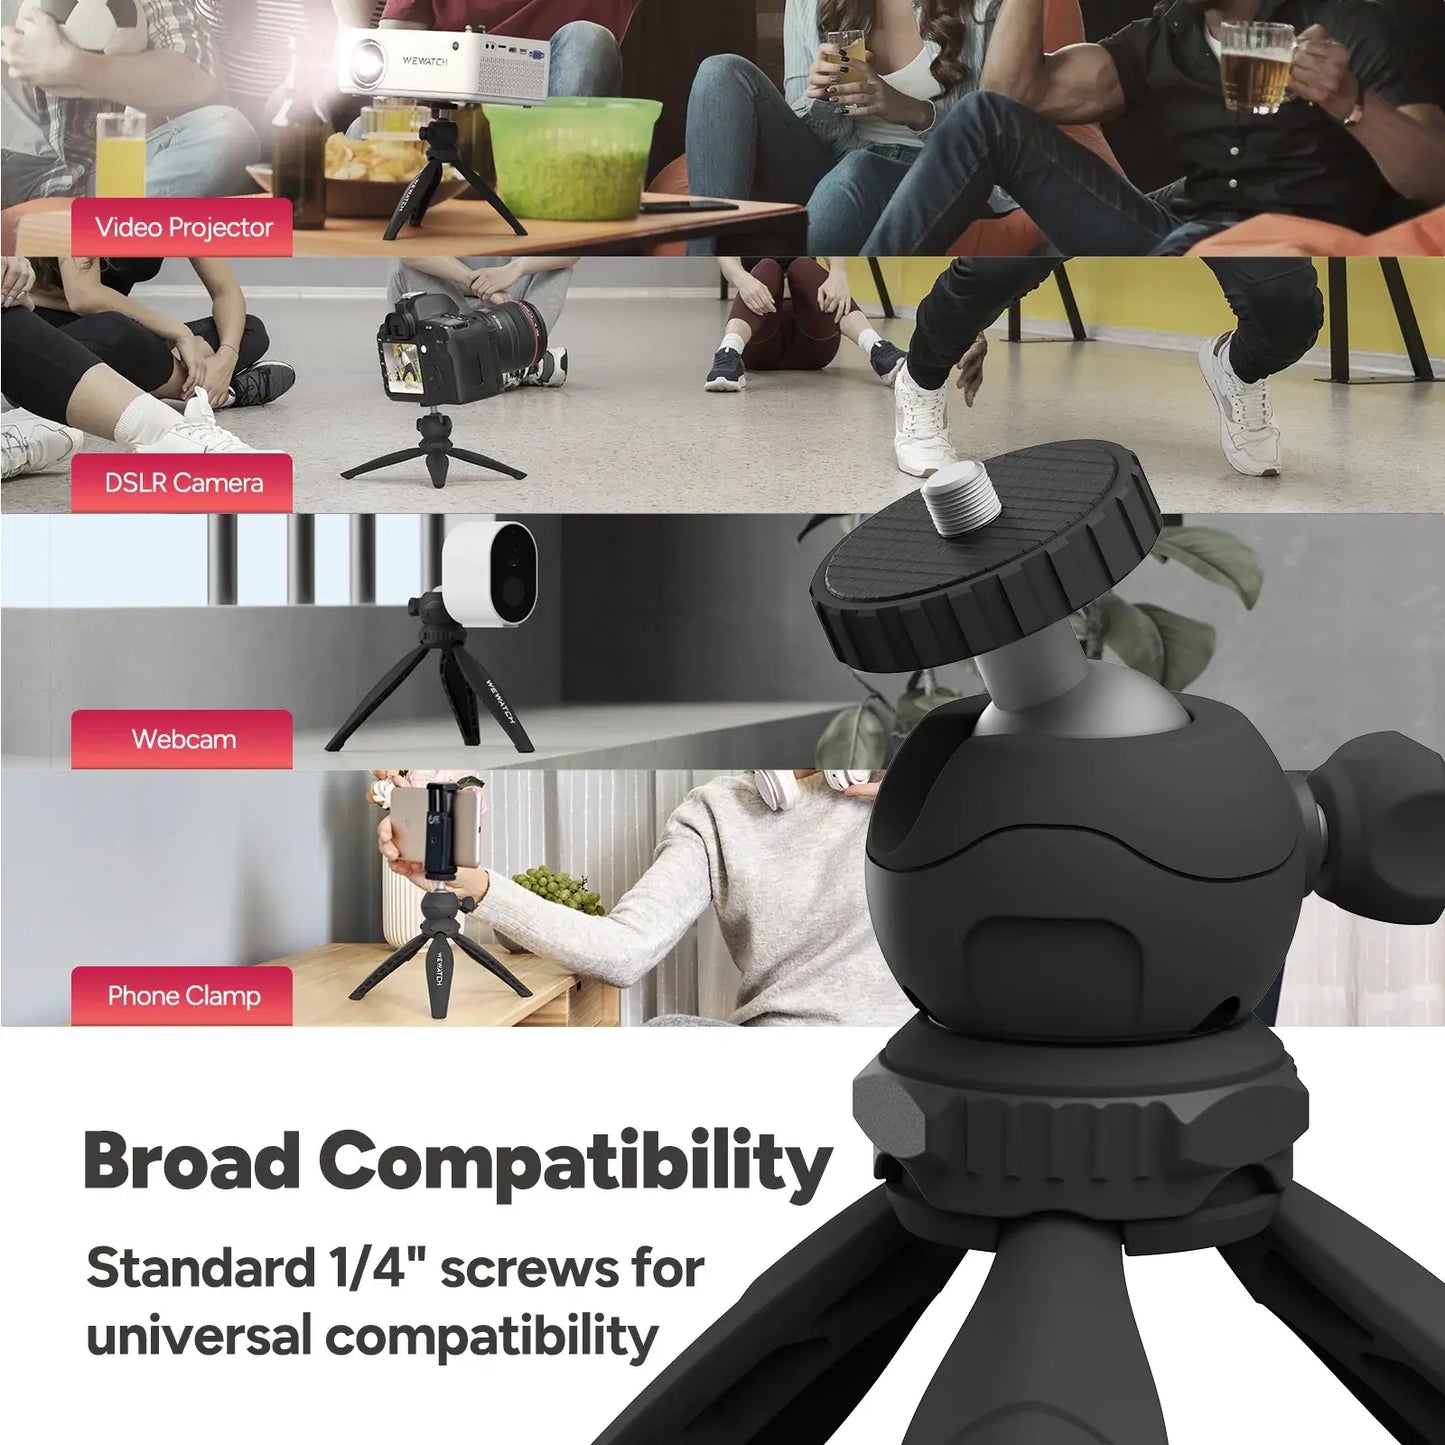 WEWATCH Mini Desktop Tripod Stand - PS102 6.3 inch Pocket Projector Tripods Stand Mount with 360°Ball Head, Small Tripod Handle for DSLR Camera Webcam Phone Holder Selfie Stick Vlog Tripod, Black